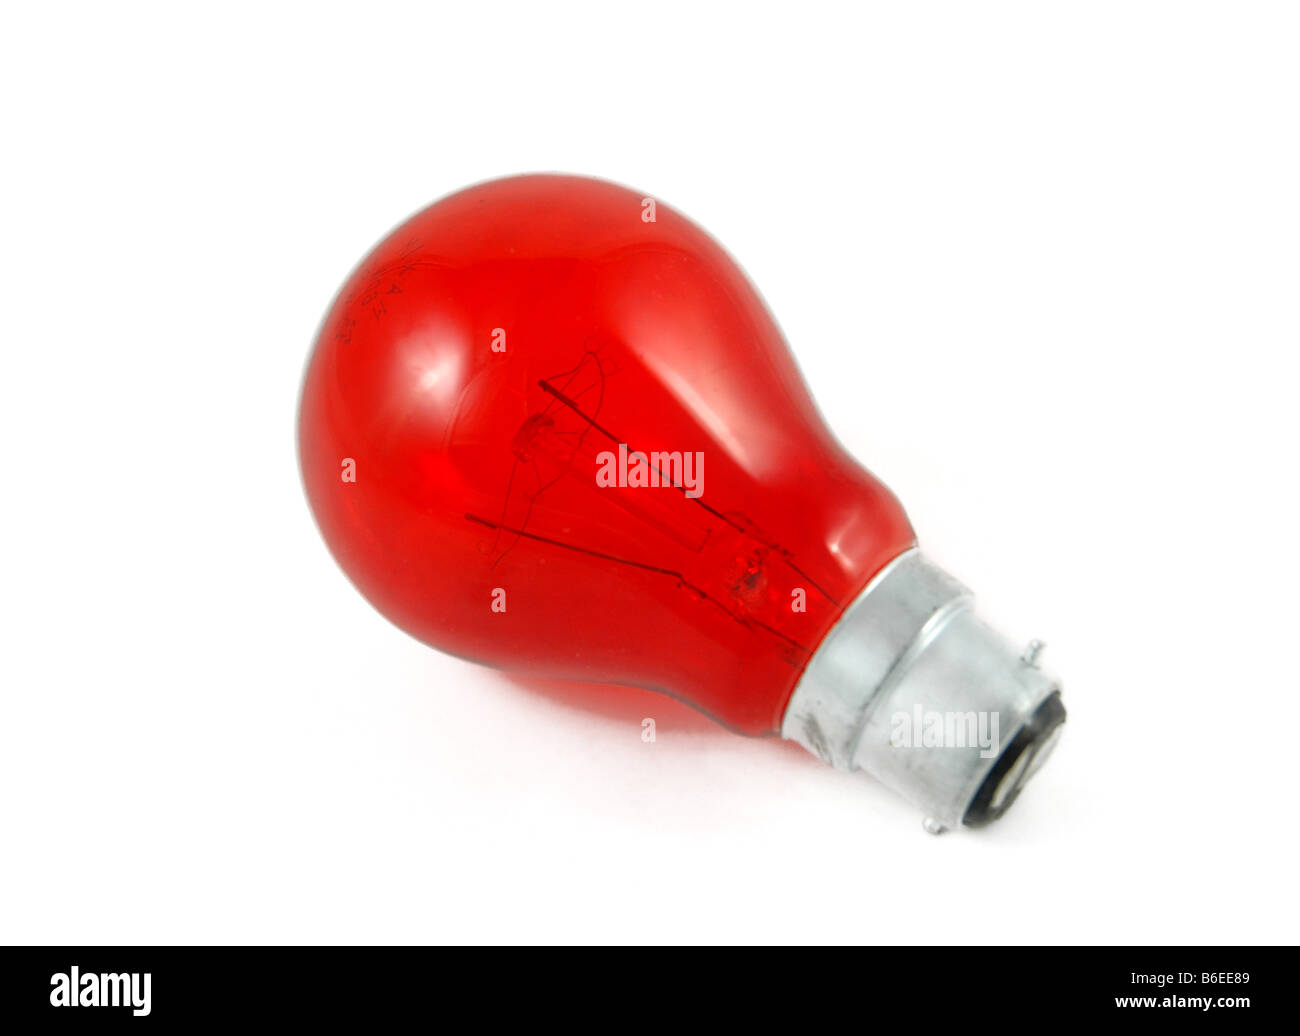 A red light bulb. Stock Photo